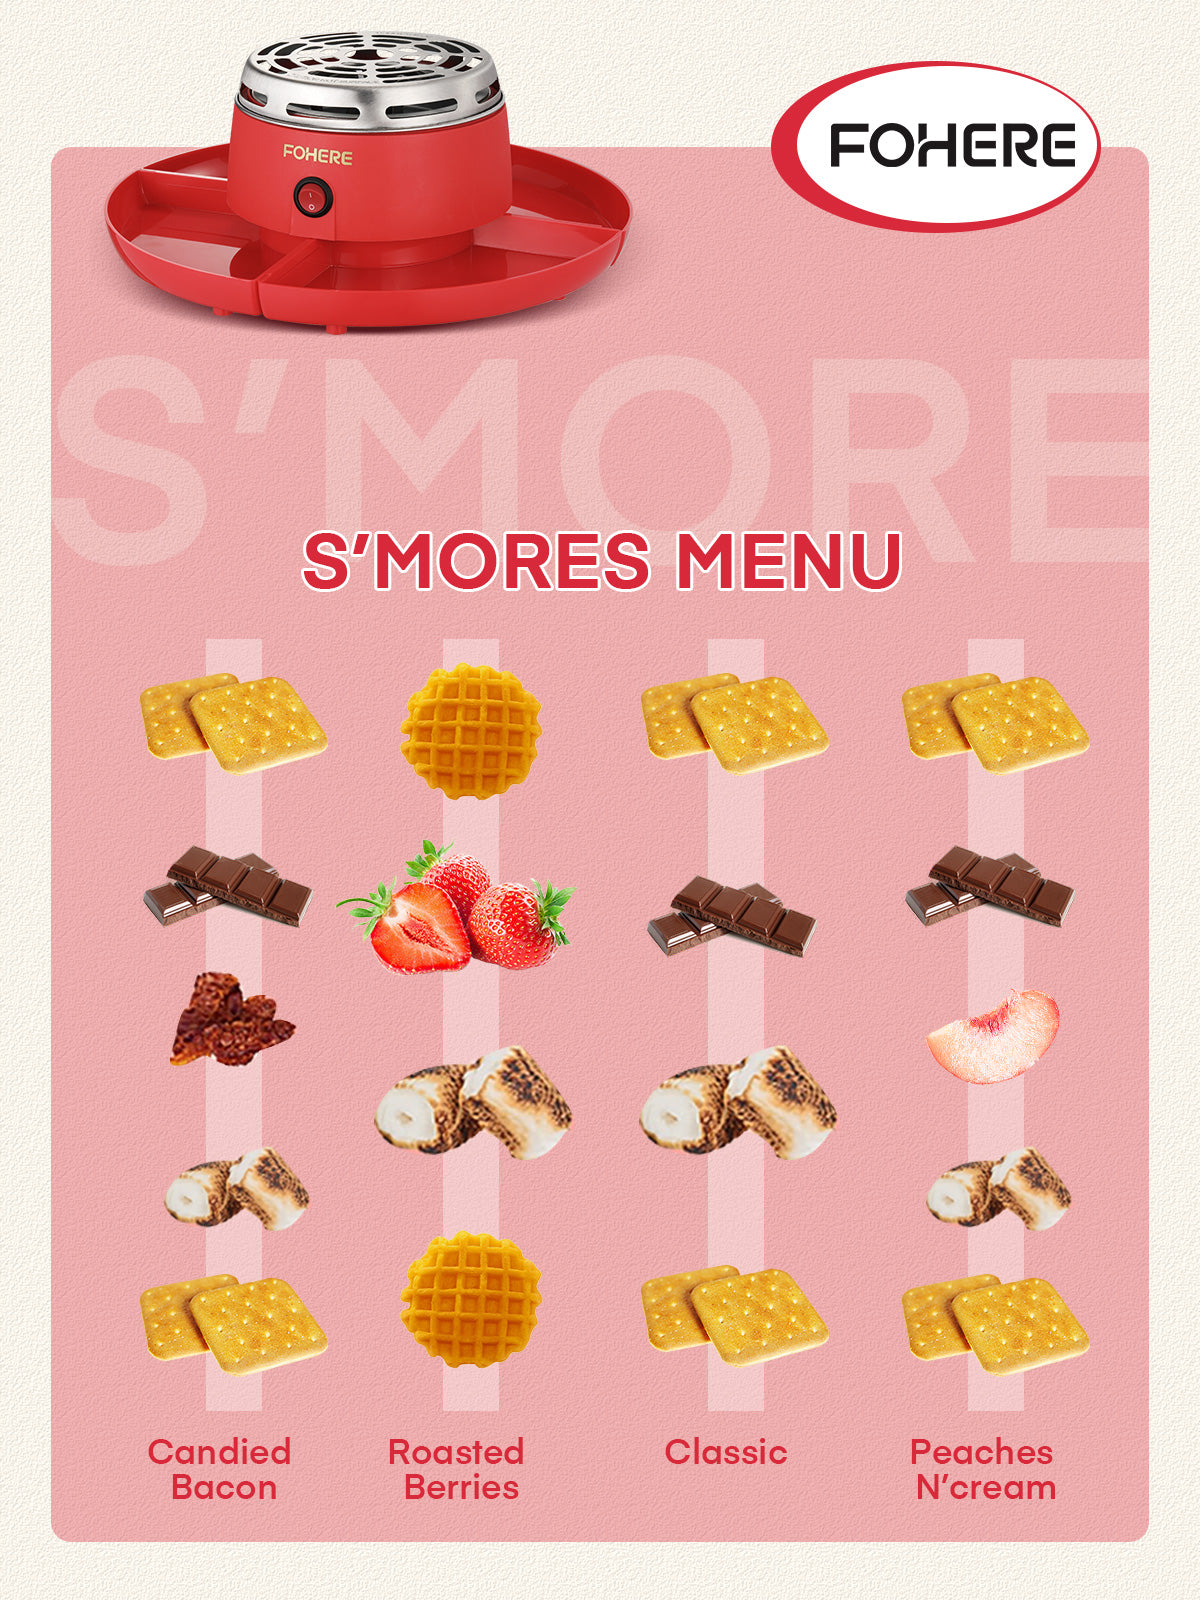 FOHERE Smores Maker Tabletop Indoor, Flameless Electric Marshmallow Roaster with 4 Detachable Trays & 4 Roasting Forks, Movie Night Supplies & Housewarming Gift, Red